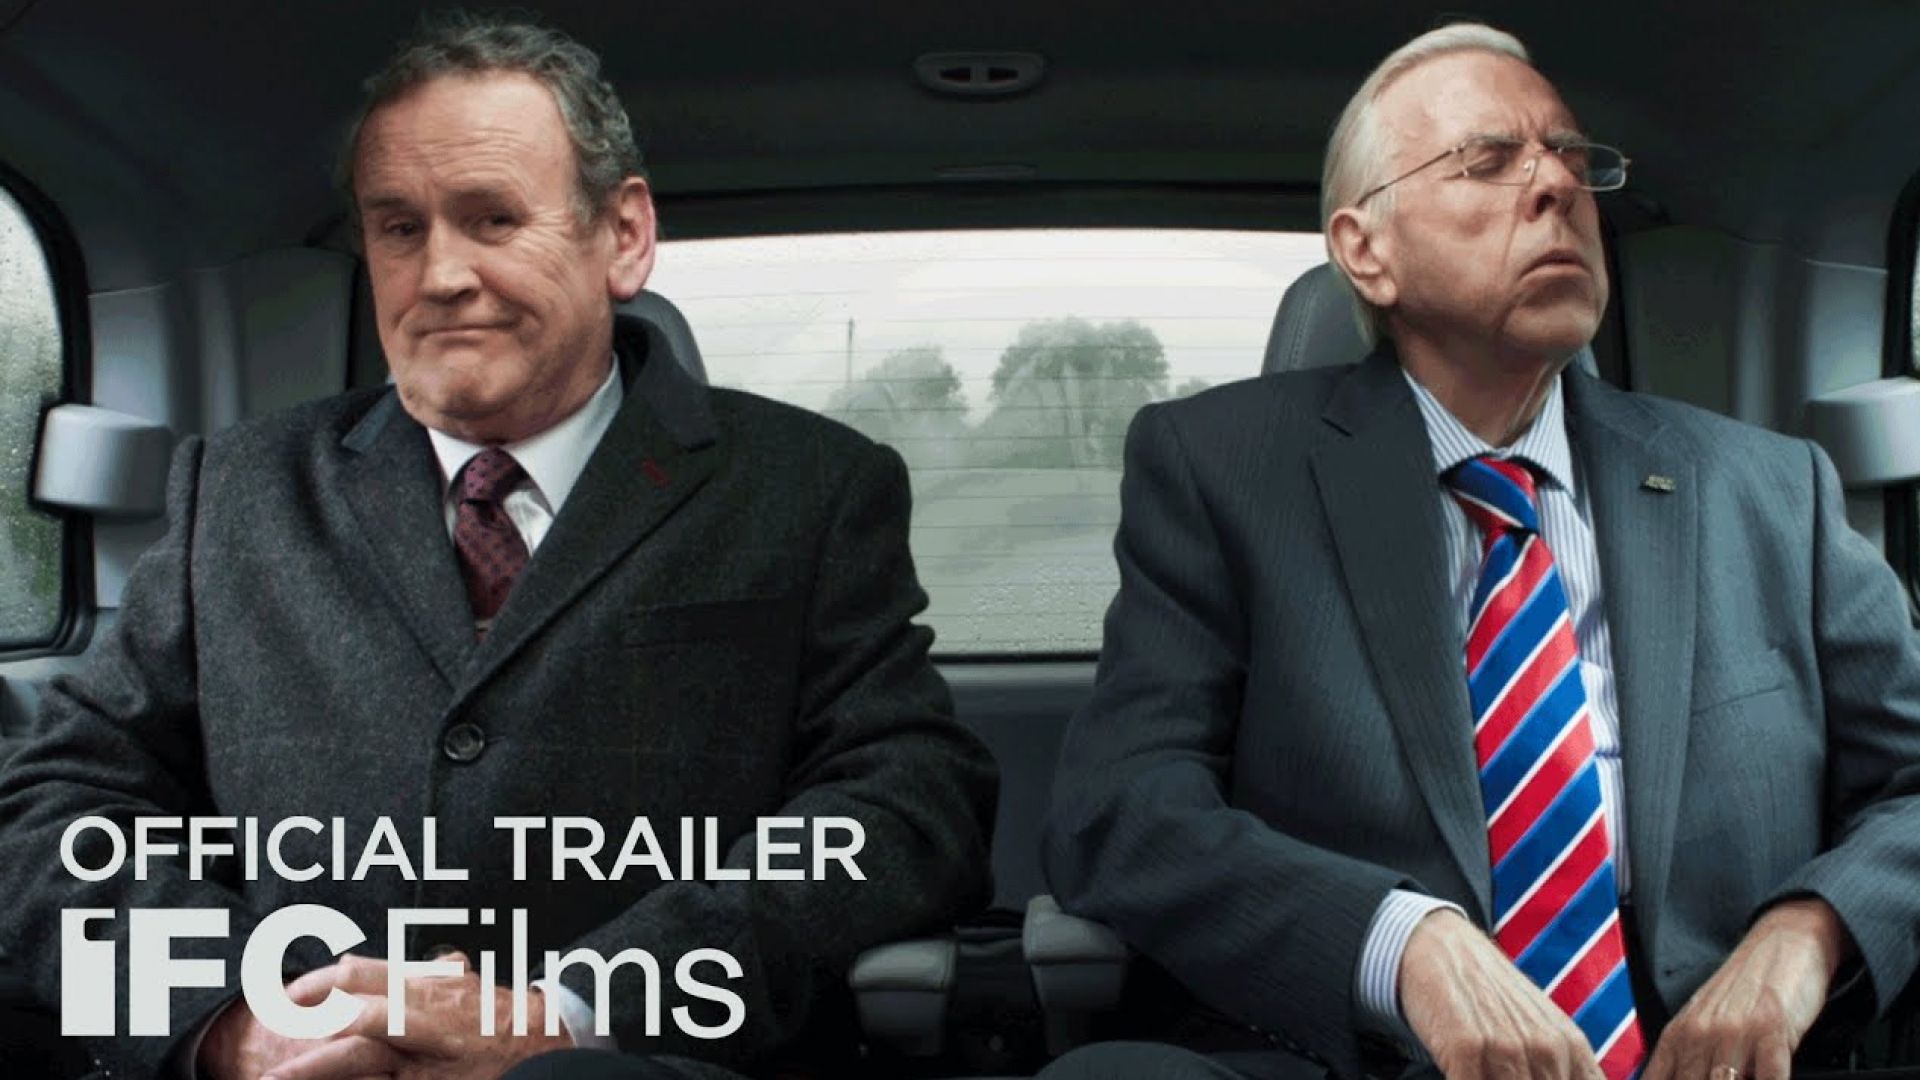 Watch Timothy Spall and Colm Meaney as Sir Ian Paisley and M